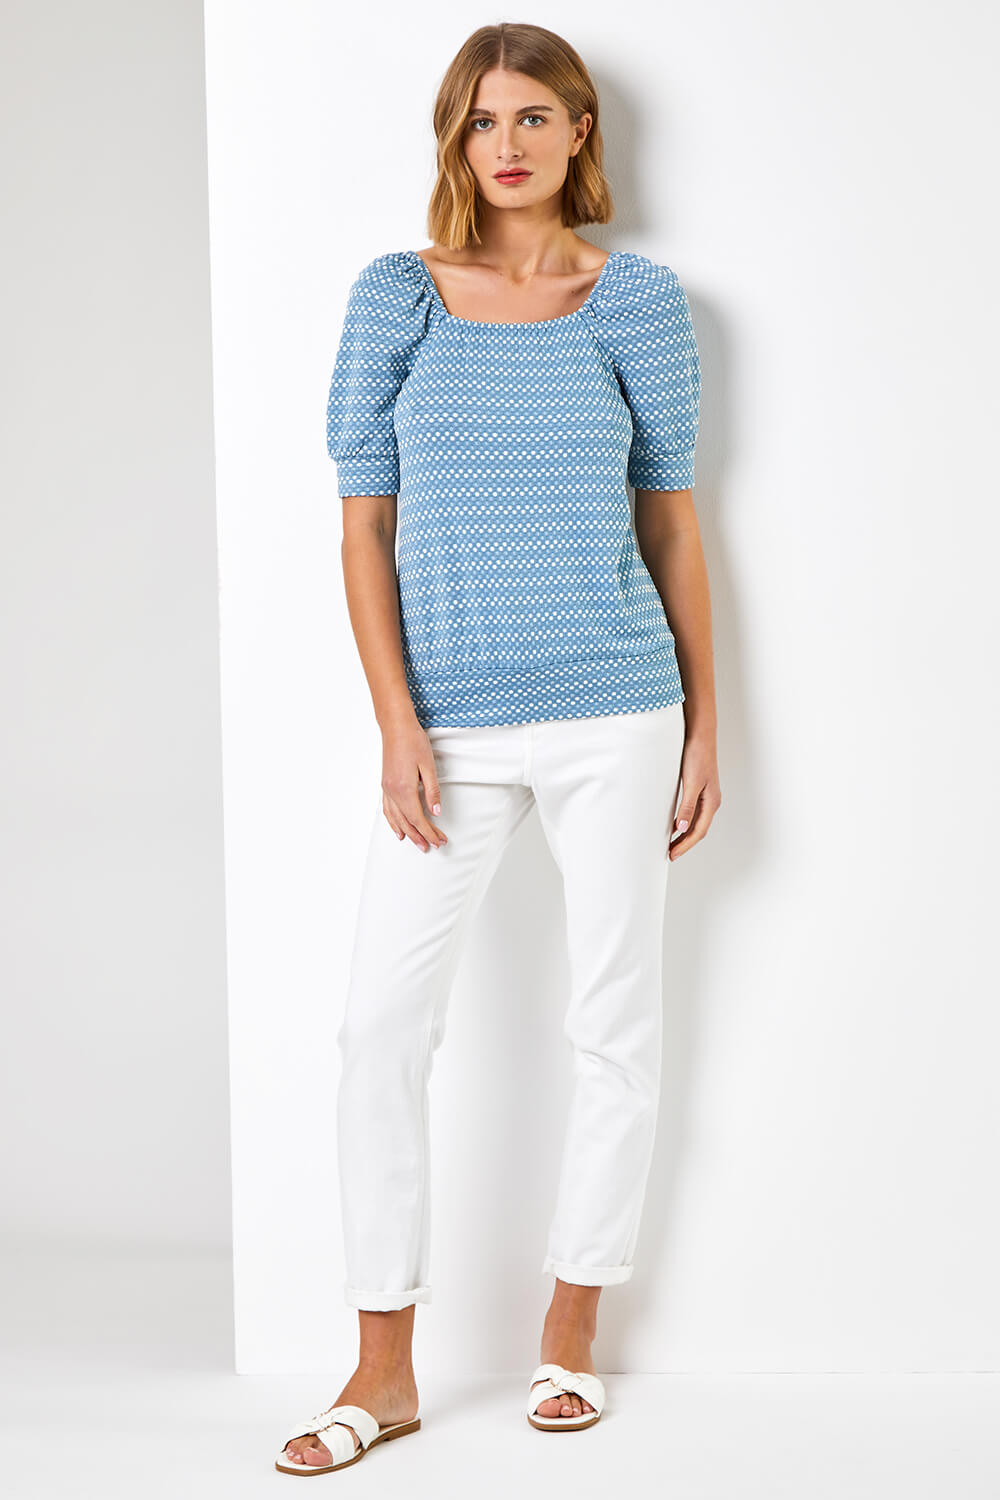 Blue Textured Spot Print Square Neck Top, Image 3 of 4